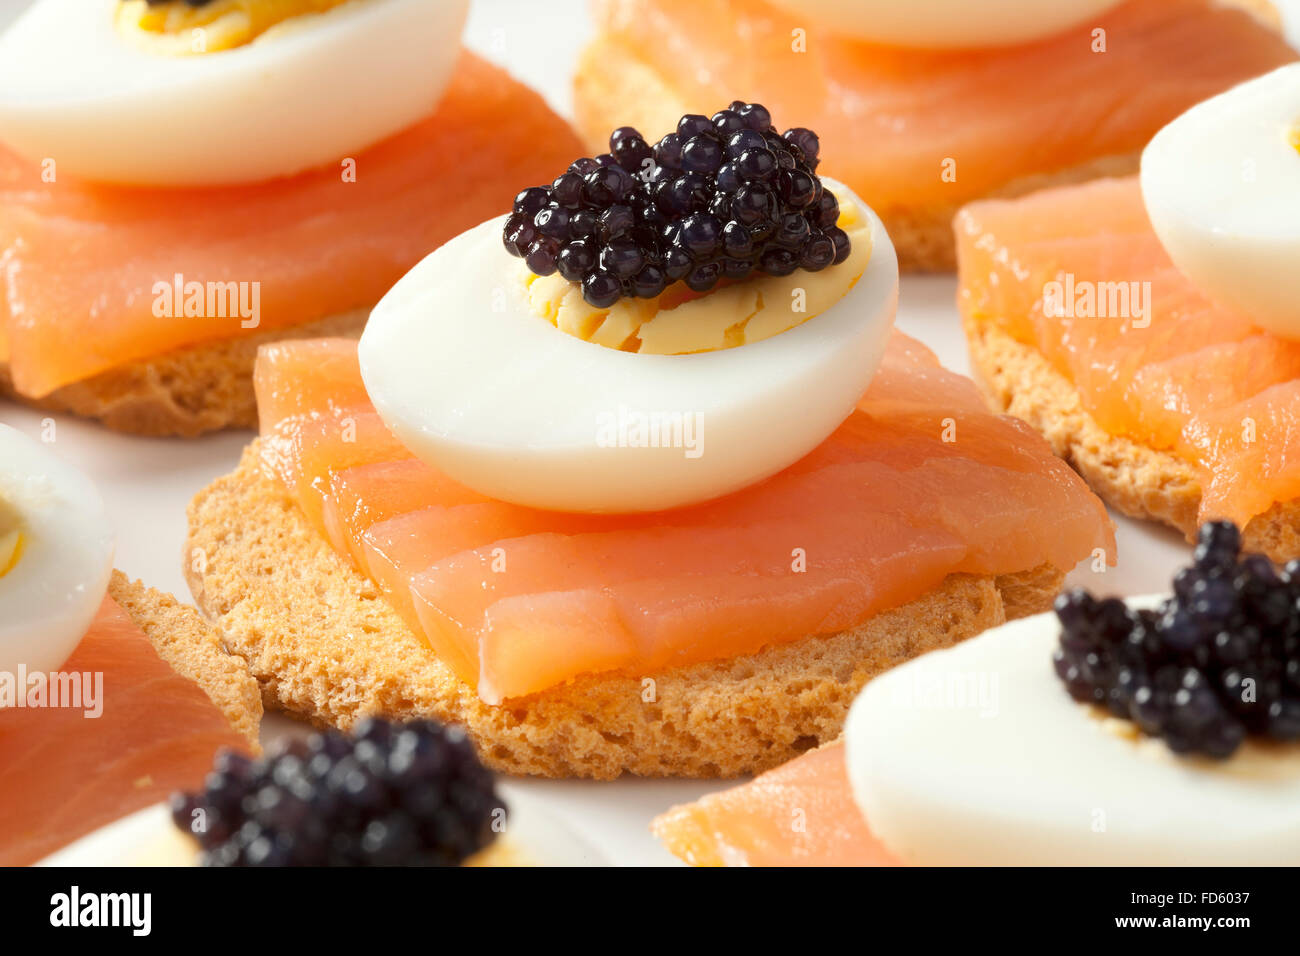 Snack with salmon,quail eggs and lumpfish roe on toast Stock Photo